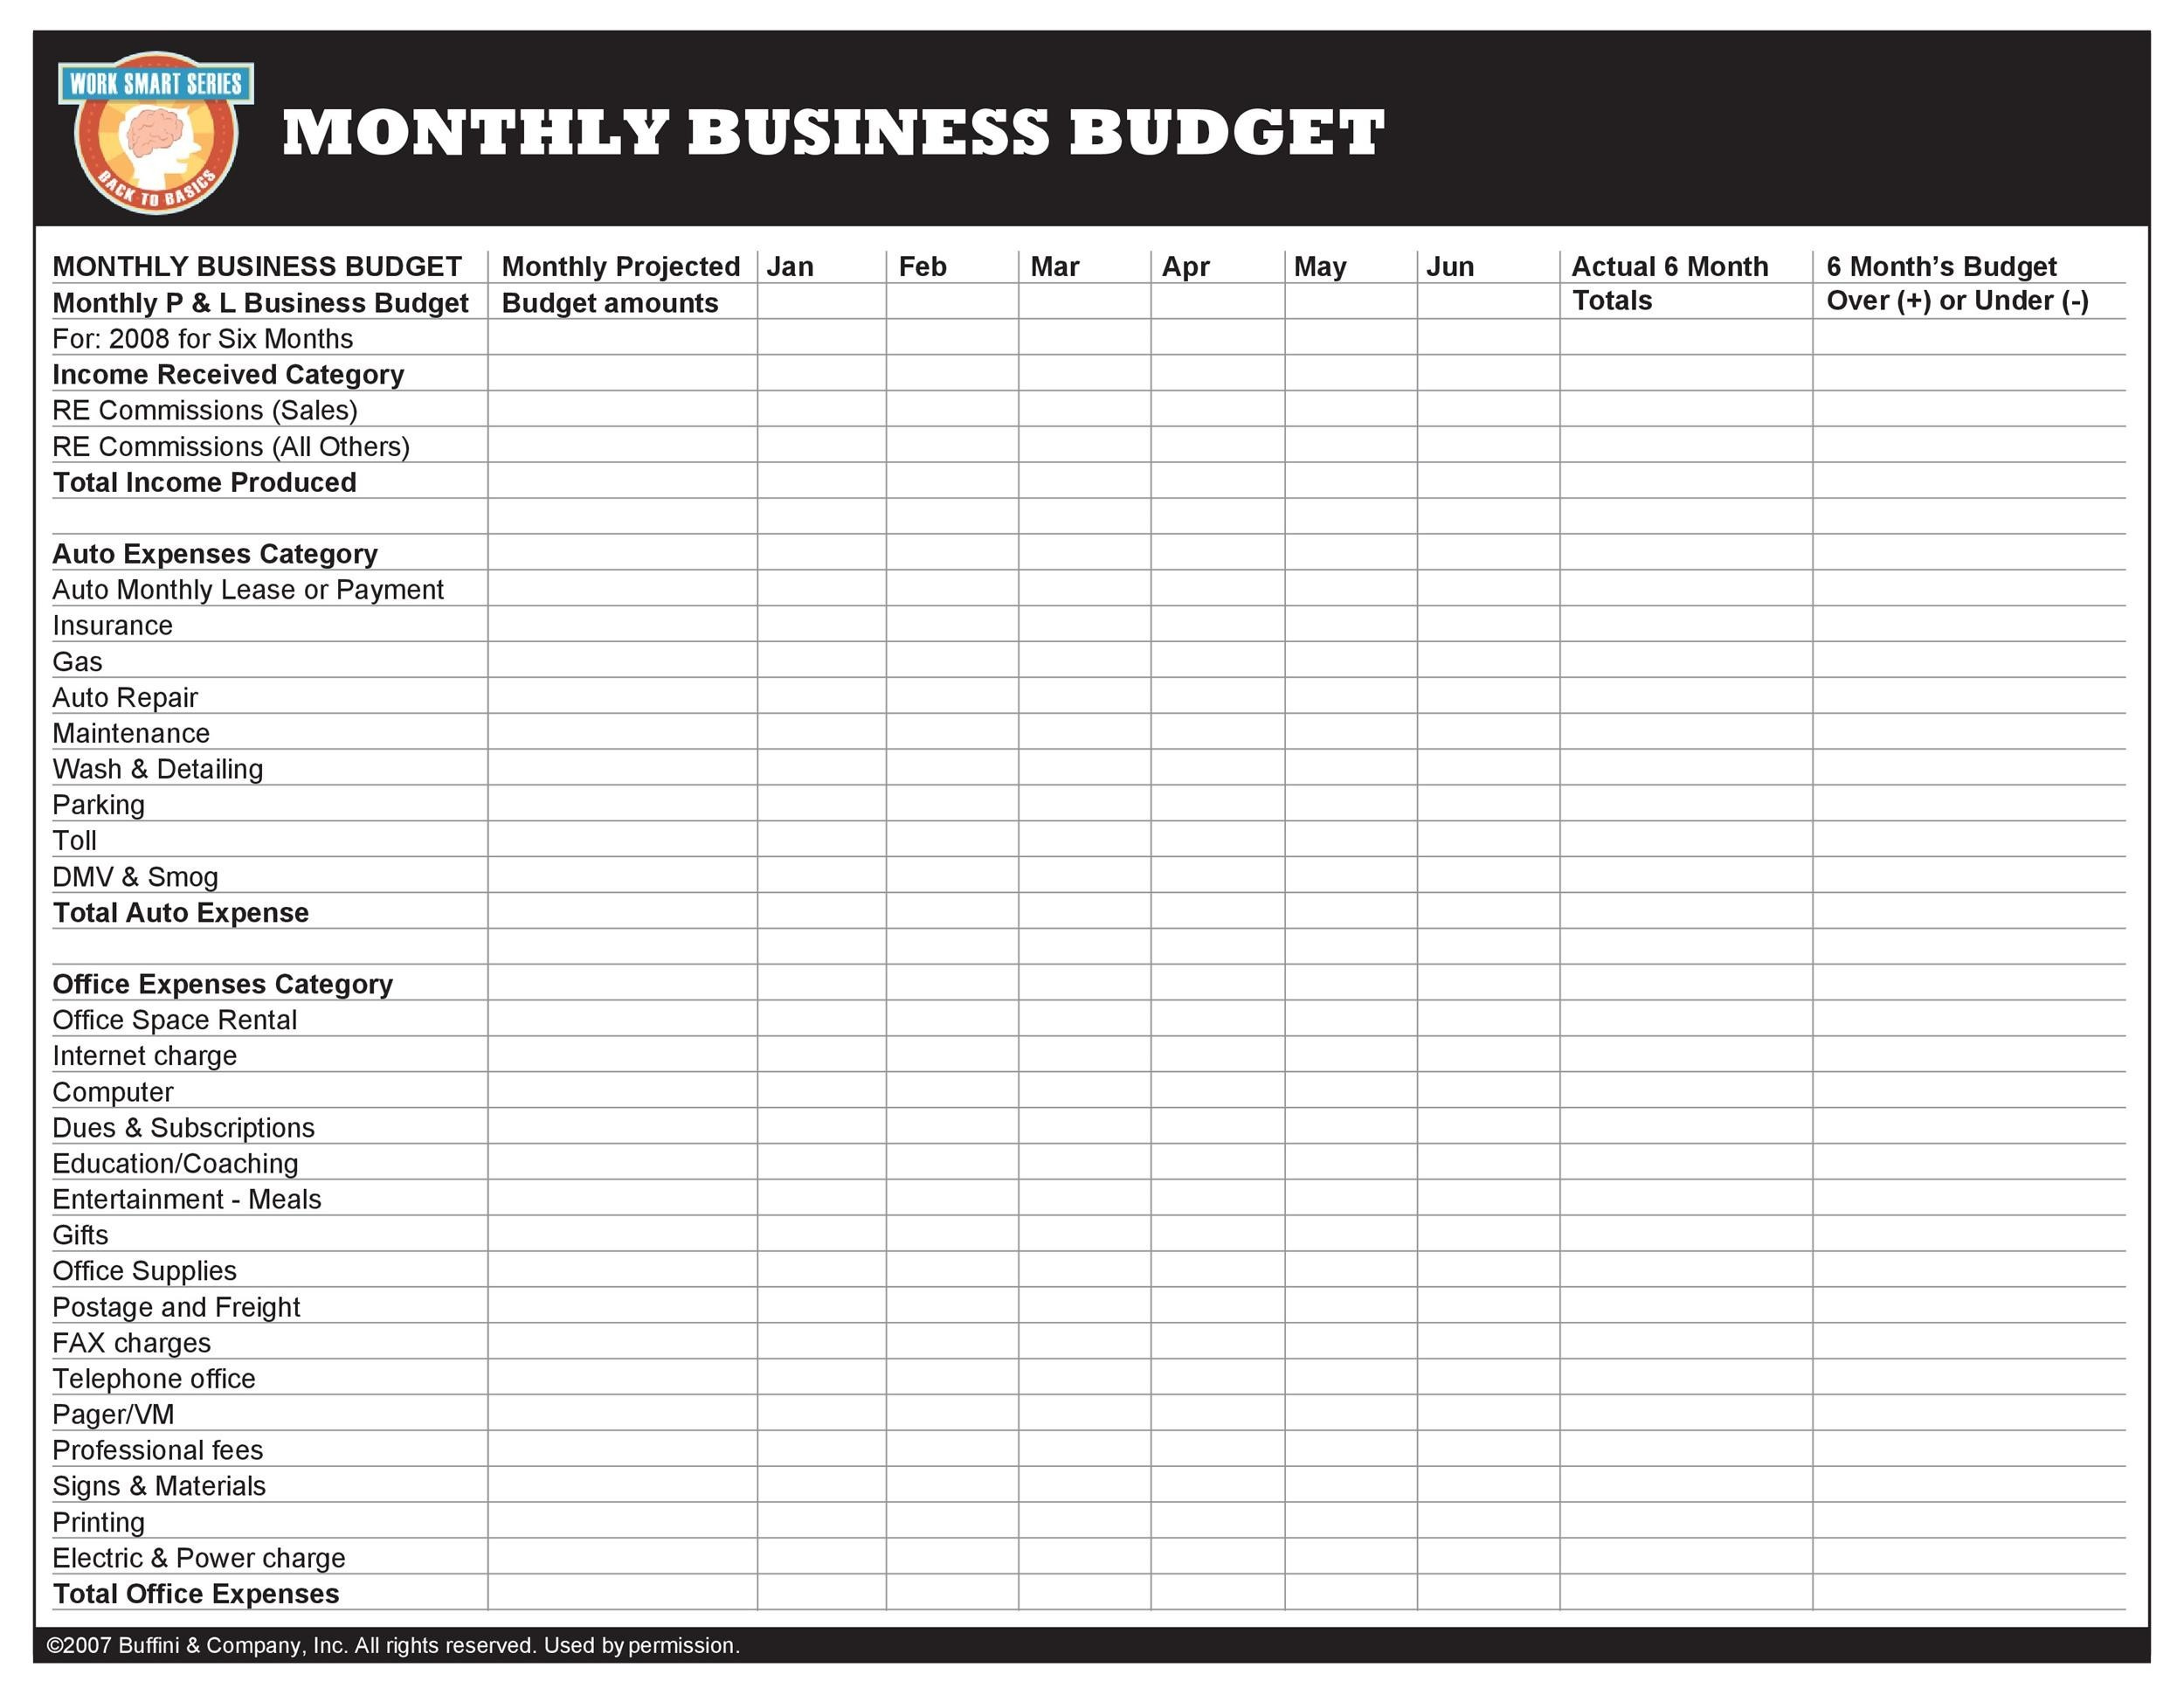 37 Handy Business Budget Templates Excel Google Sheets TemplateLab